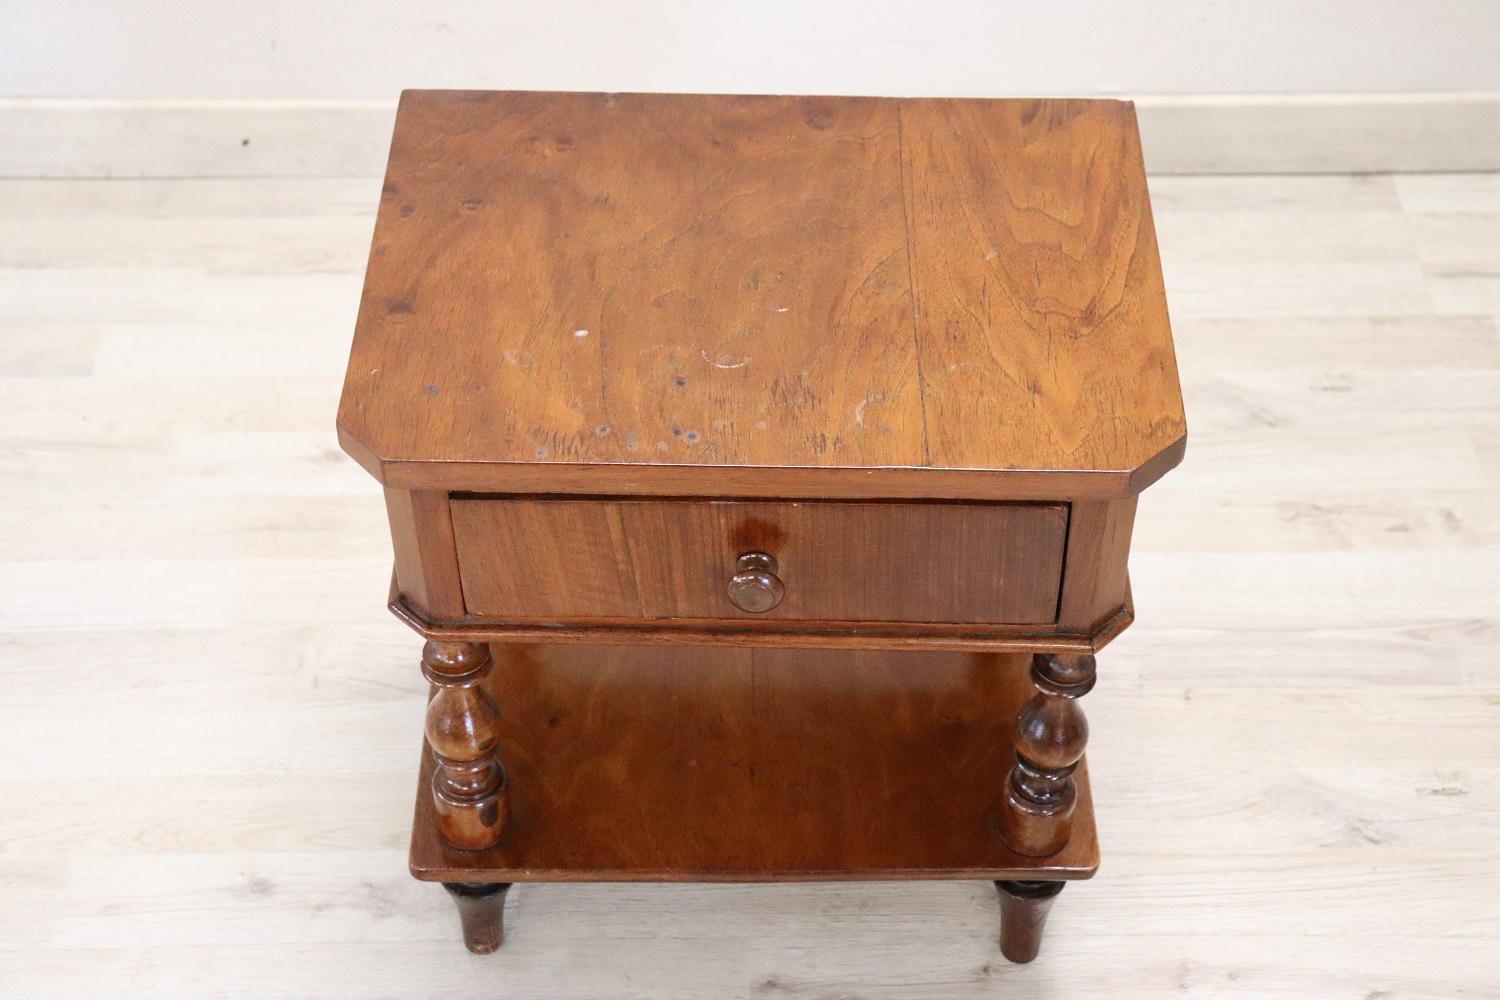 Rare and fine quality Italian Louis Philippe 1850s antique nightstand solid walnut. On the front one comfortable drawer. Characterized by elegant turned legs and a useful shelf in the lower part. Very good condition.